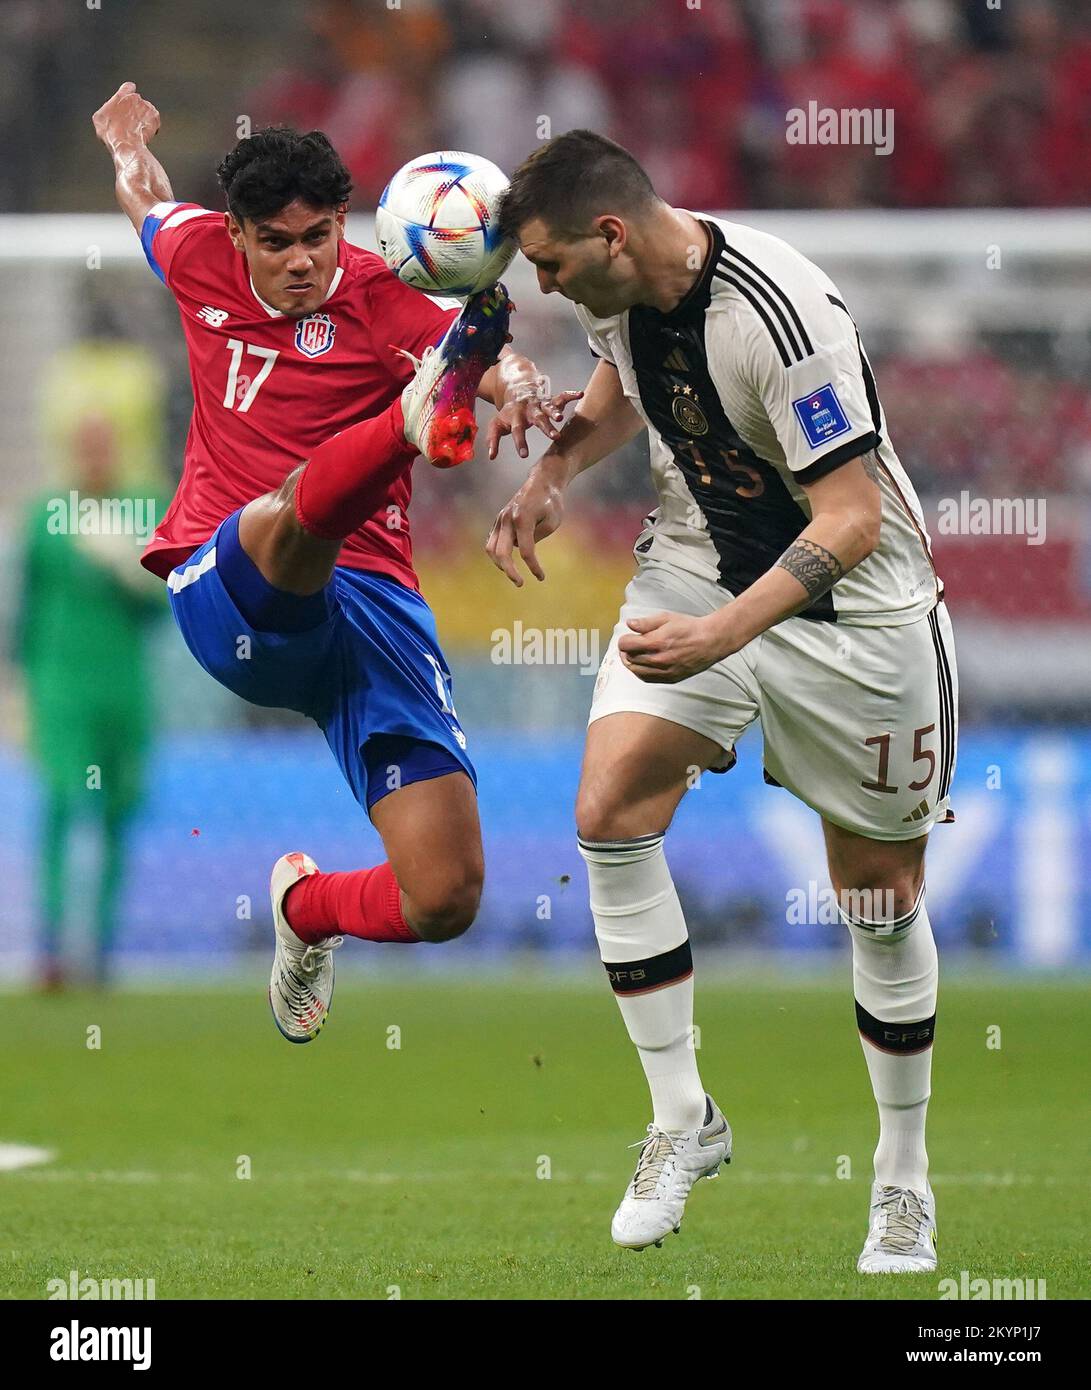 Costa Rica's Yeltsin Tejeda (left) and Germany's Niklas Suele battle for the ball during the FIFA World Cup Group E match at the Al Bayt Stadium, Al Khor, Qatar. Picture date: Thursday December 1, 2022. Stock Photo